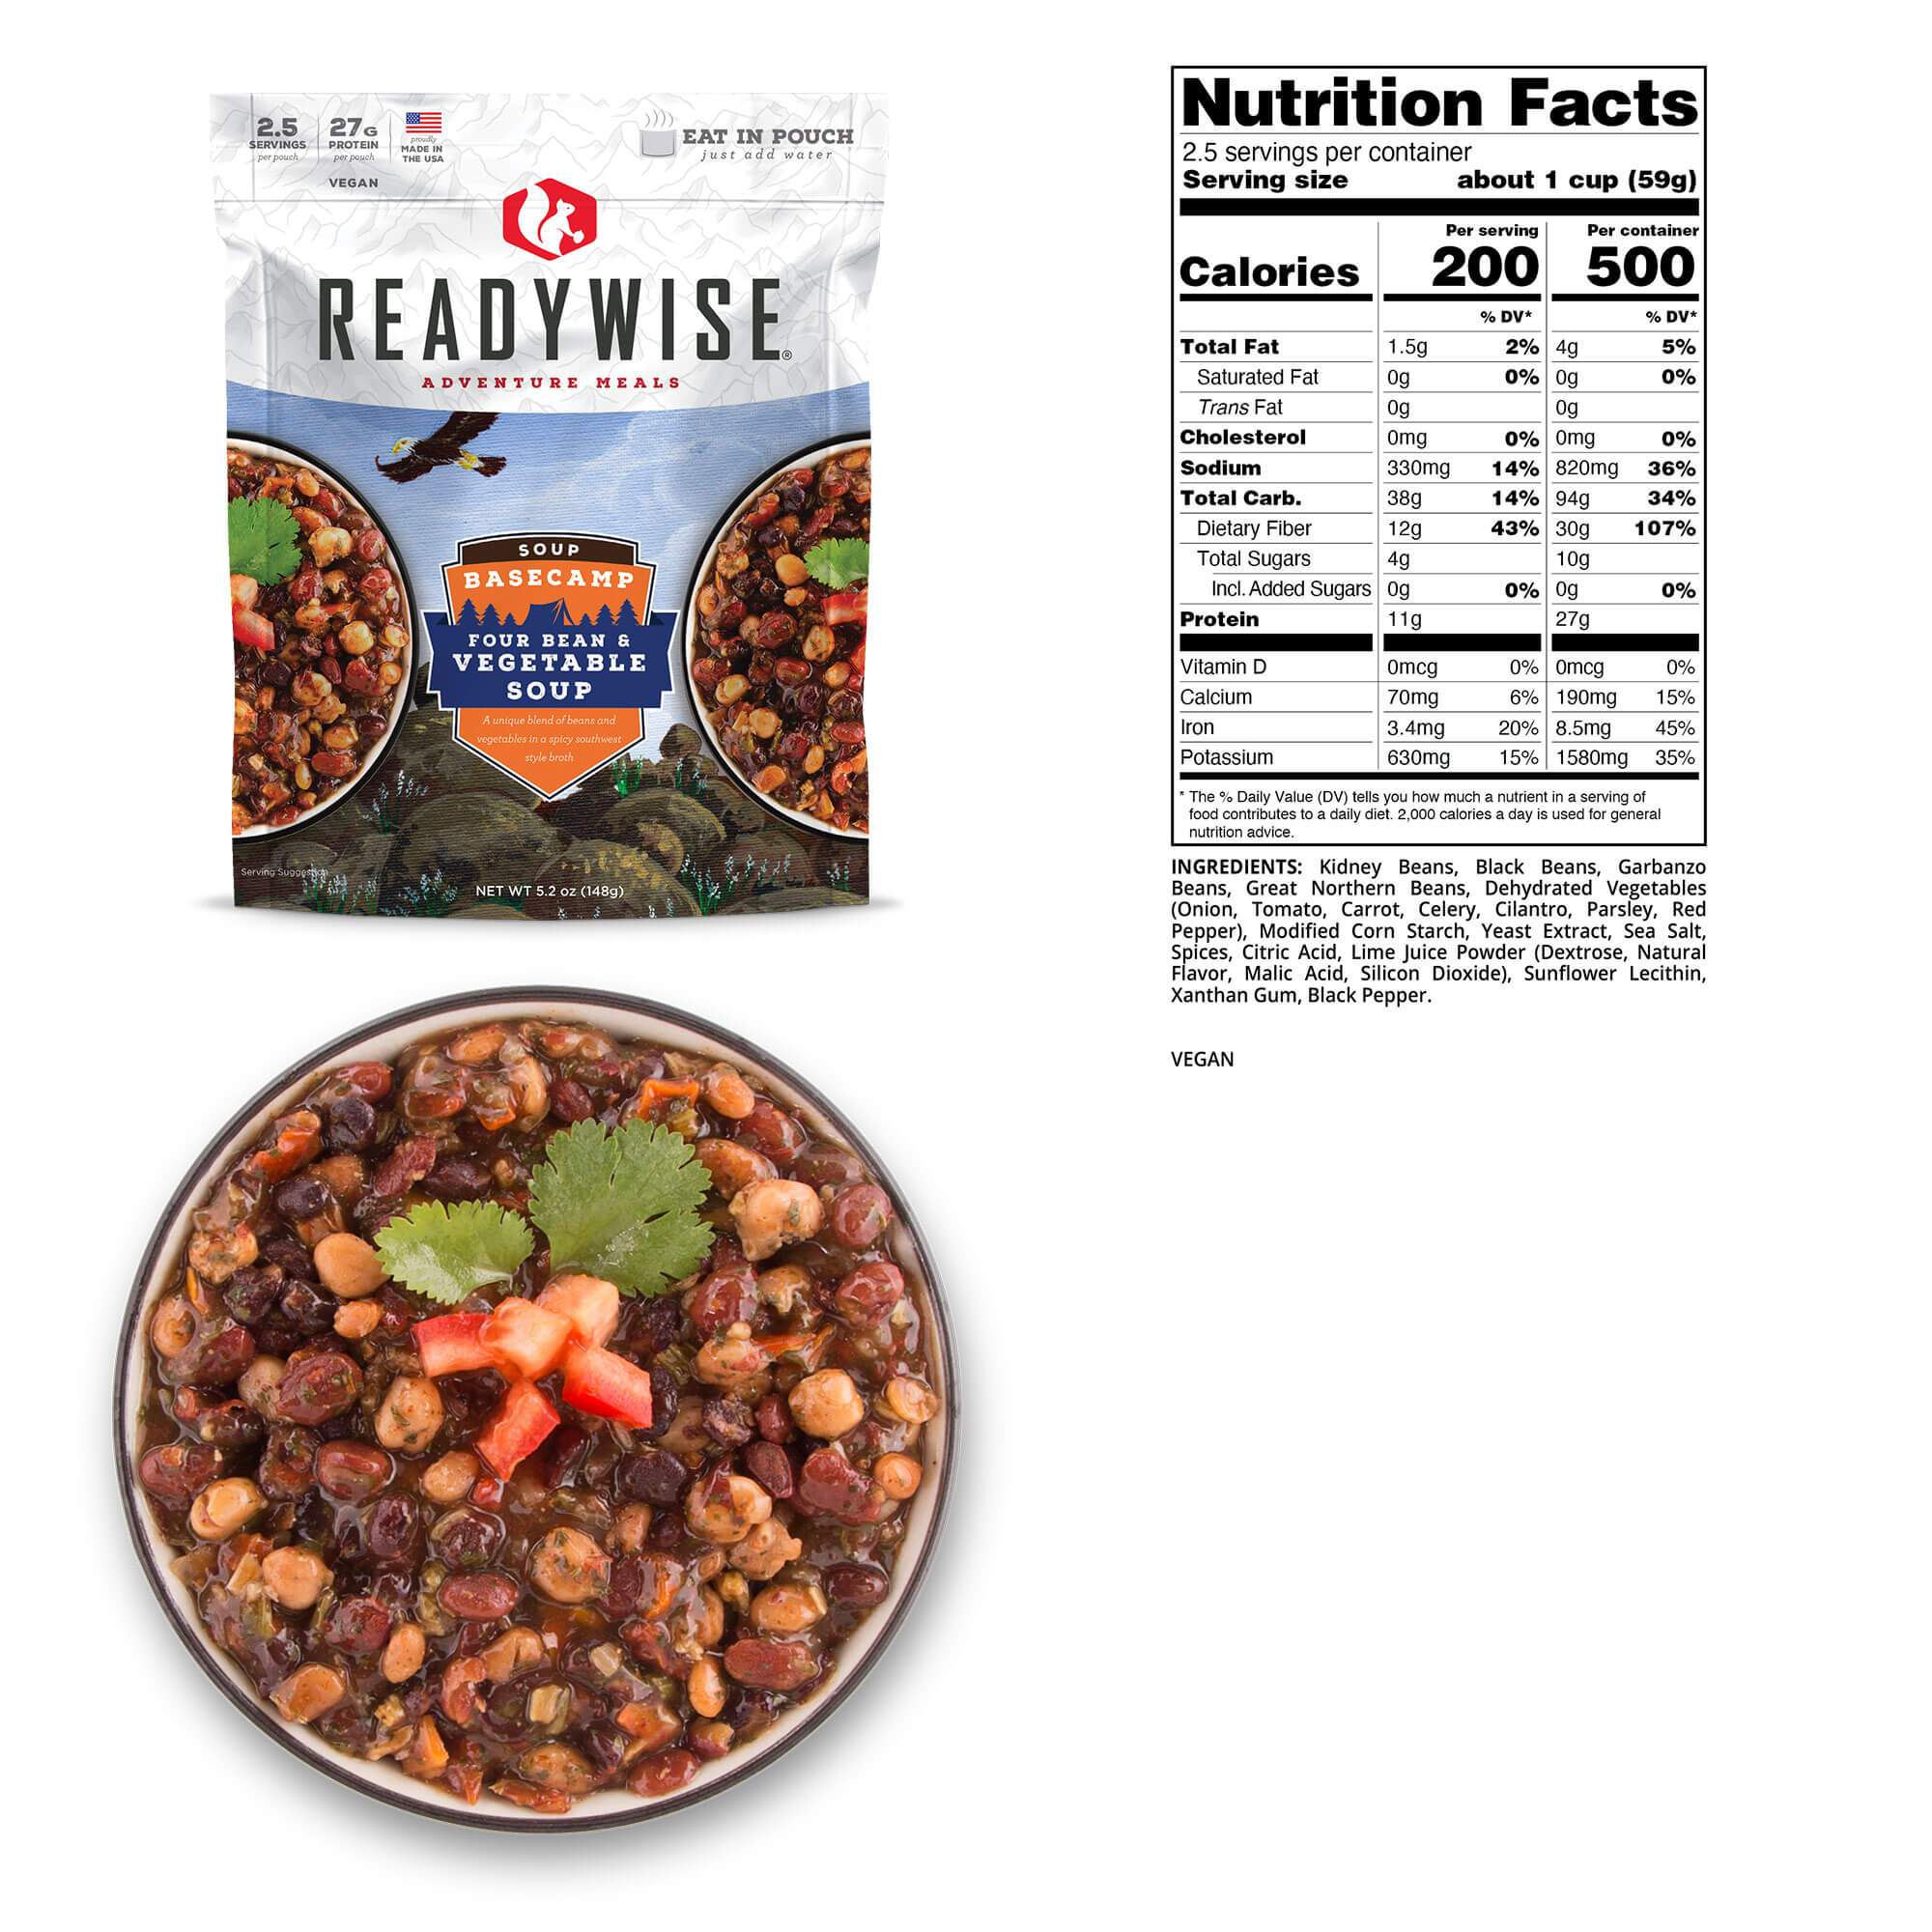 Readywise Basecamp Four Bean and Vegetable Soup - 6 Pack (SHIPS IN 1-2 WEEKS) chickpea & chickpea & chickpea & chickpea & chickpea.